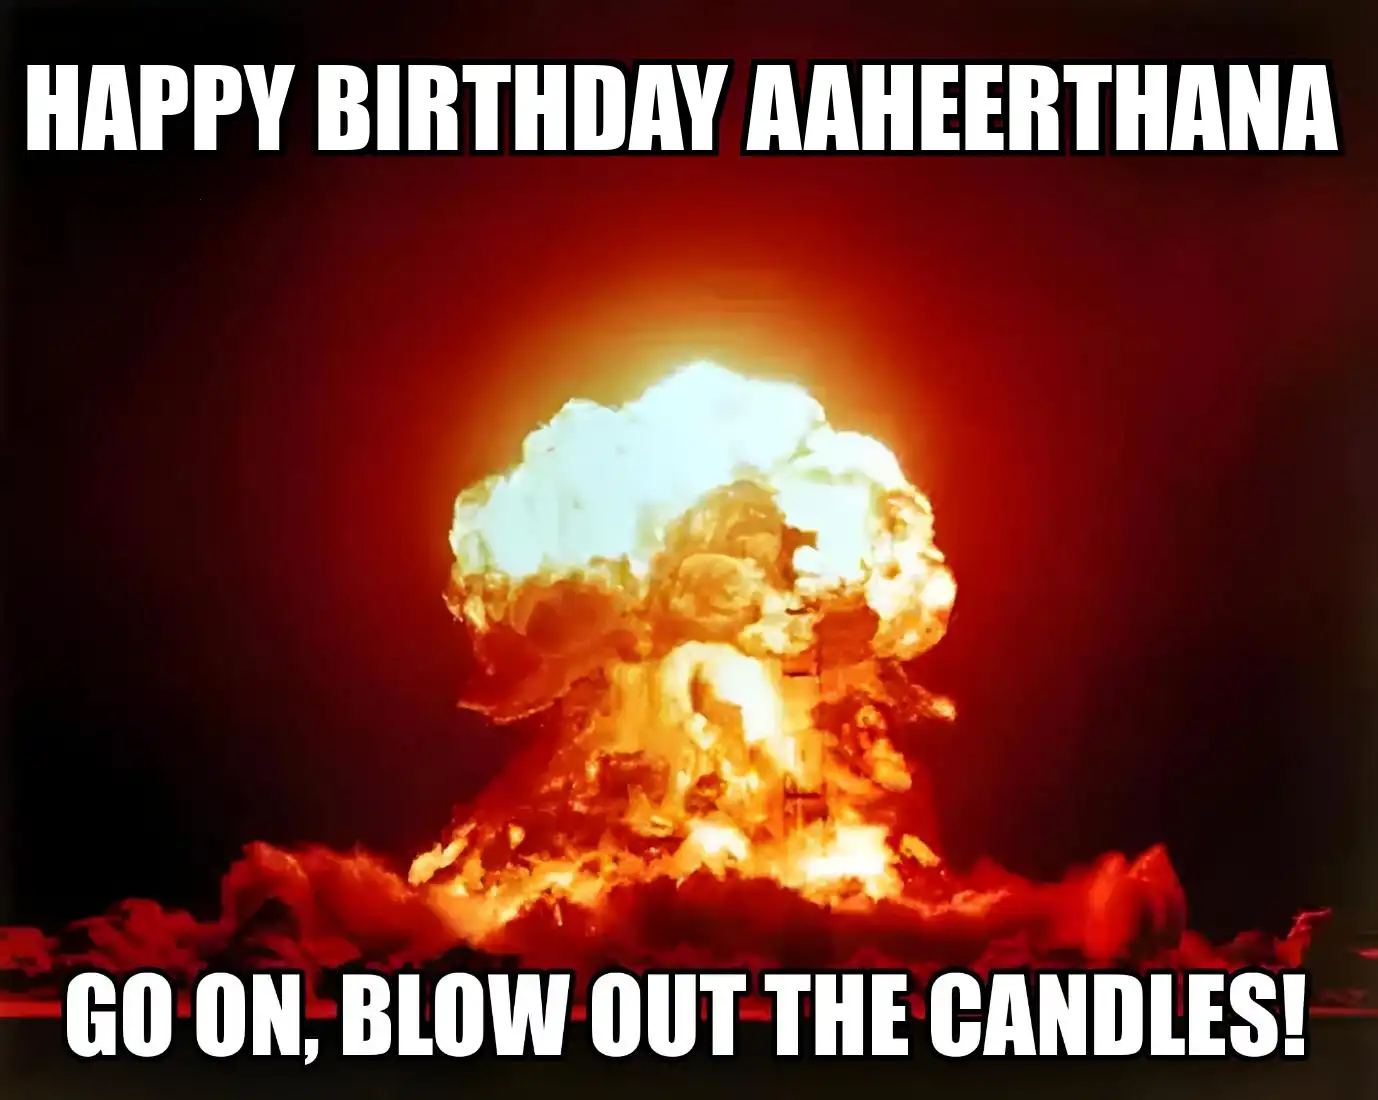 Happy Birthday Aaheerthana Go On Blow Out The Candles Meme